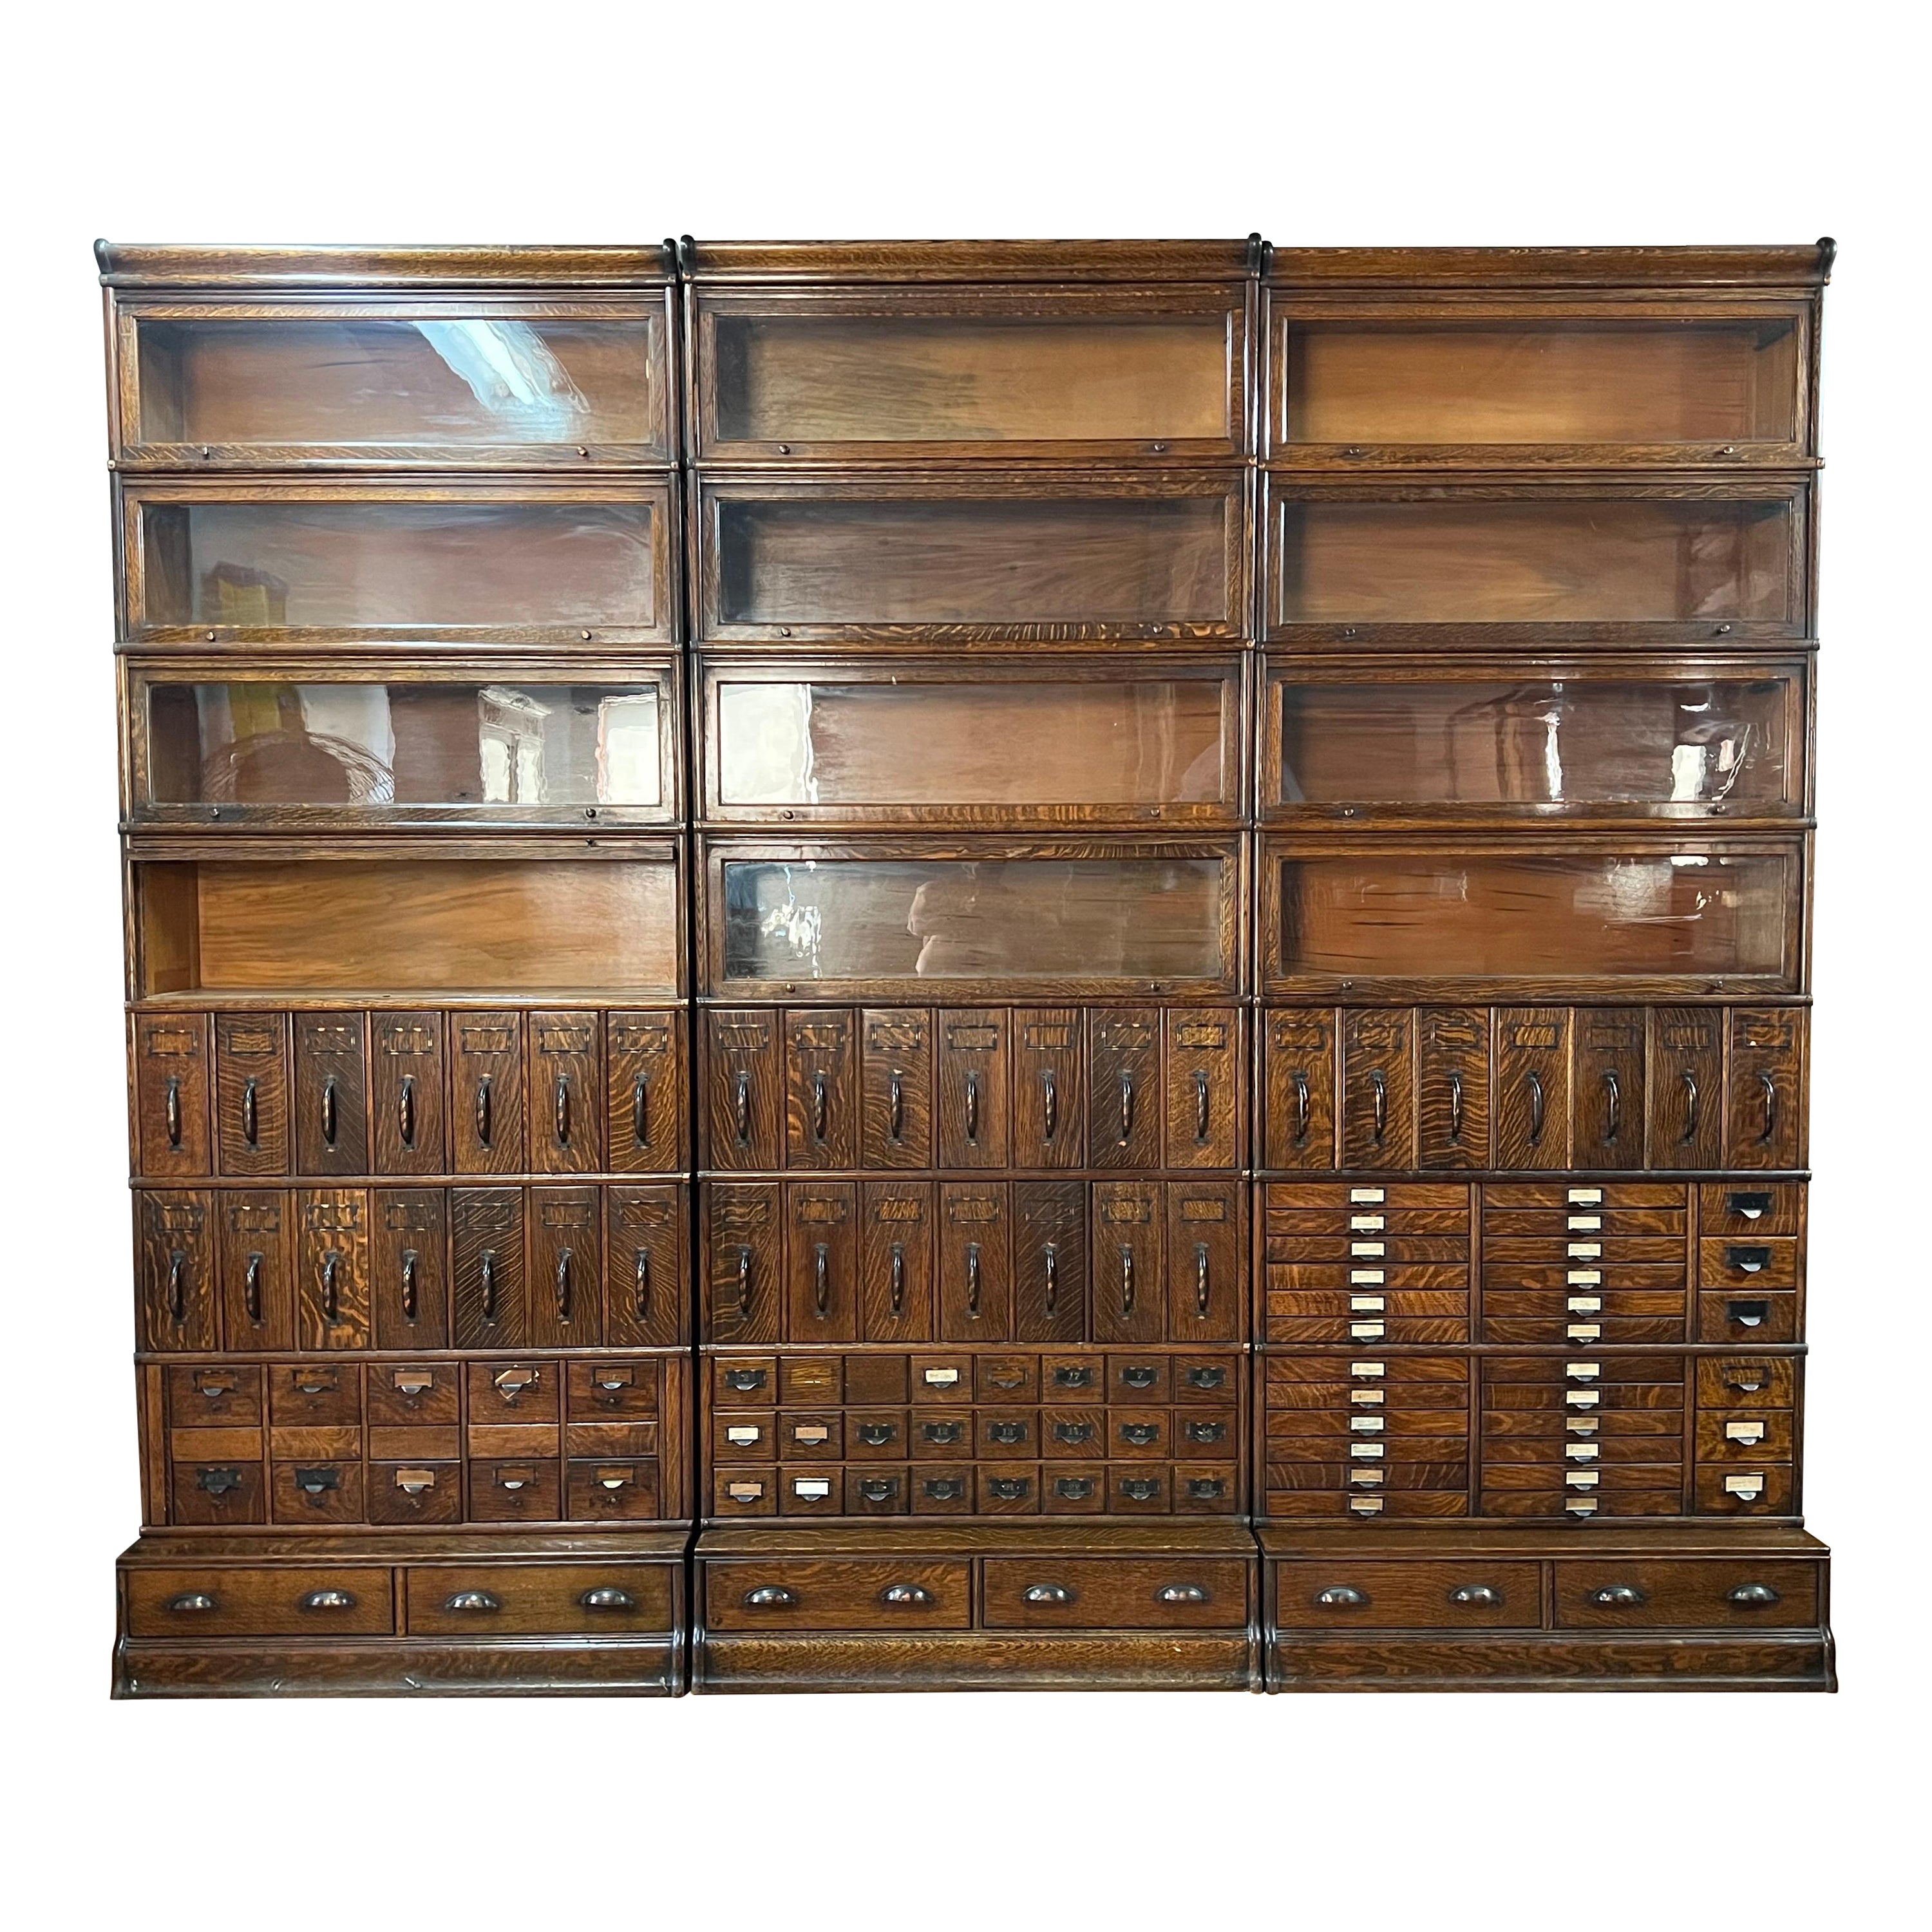 Monumental 1903 Glove Wernicke Tiger Oak Barrister Bookcases and File Cabinets For Sale